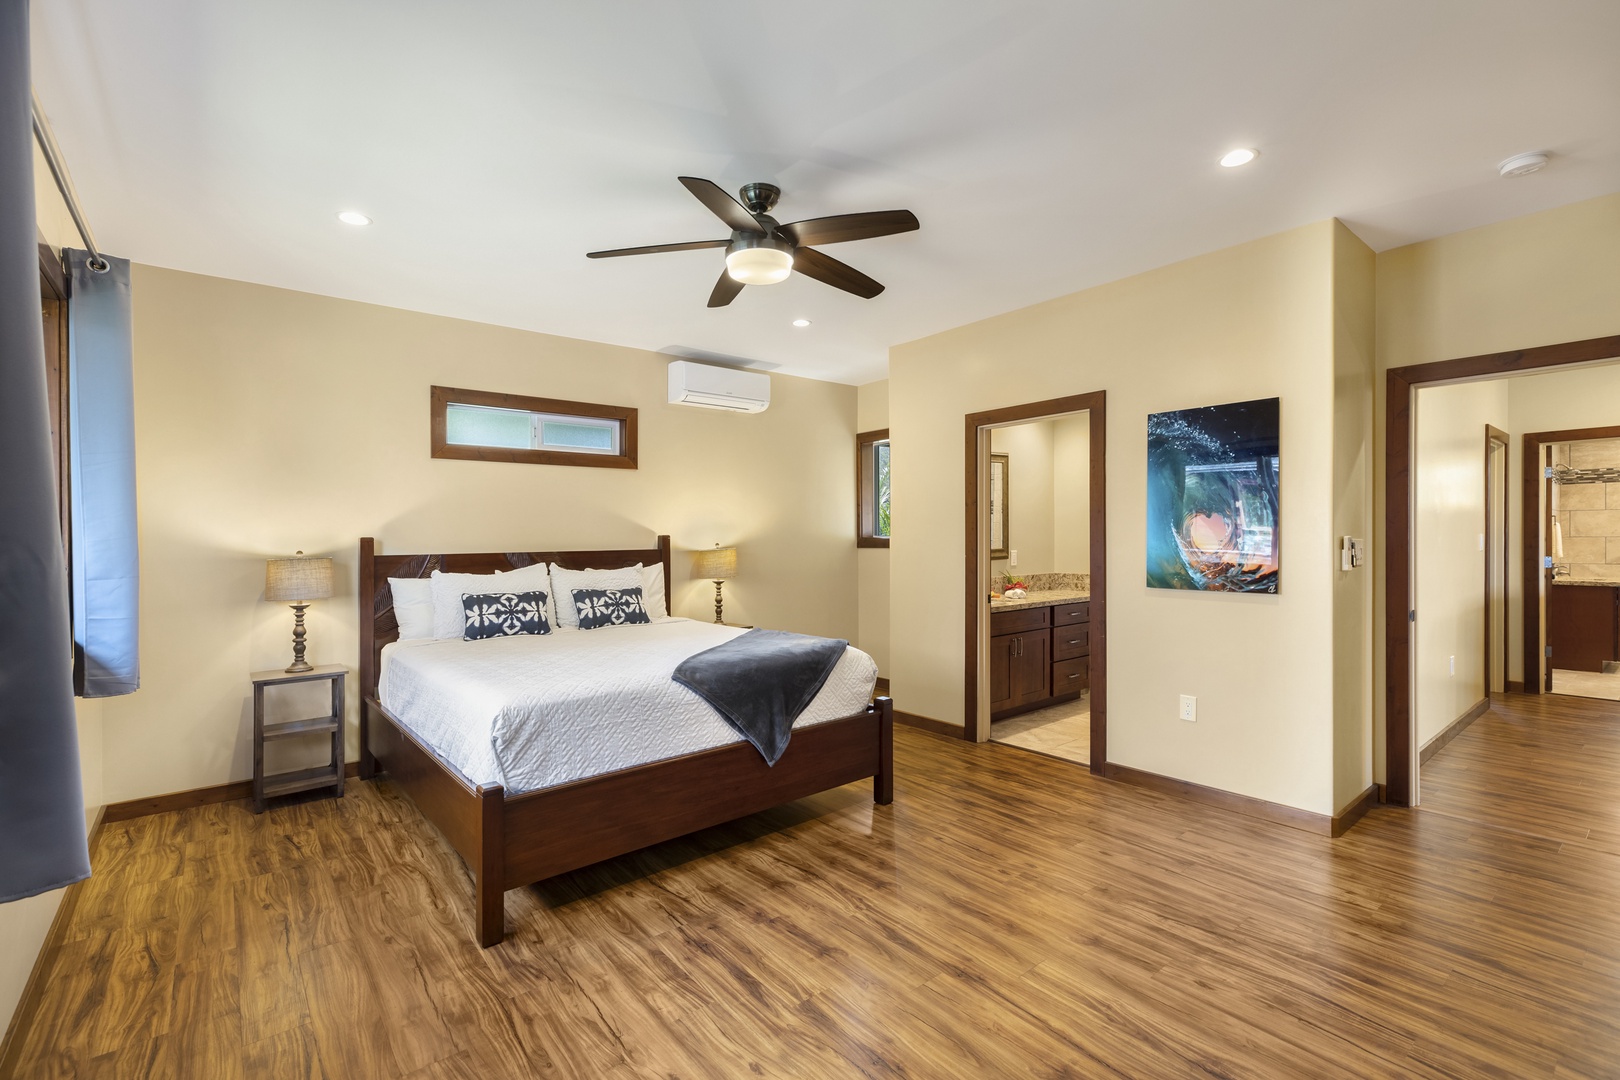 Haleiwa Vacation Rentals, Waimea Dream - The upstairs primary bedroom has a king-size bed and en suite bath.